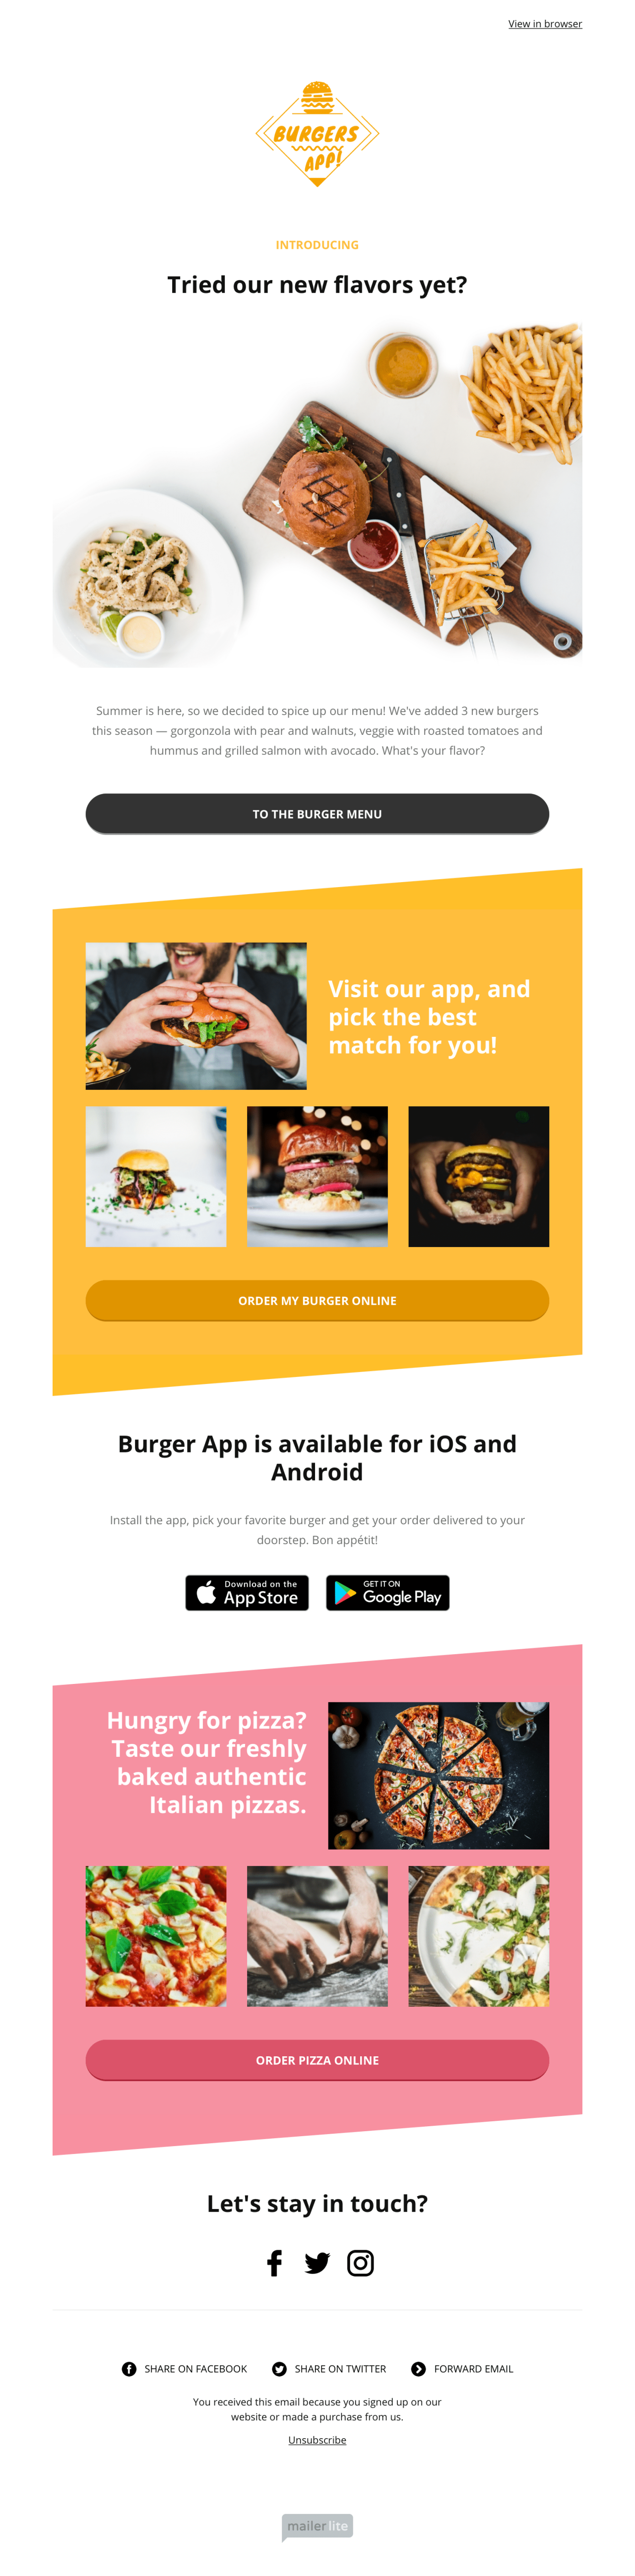 Download a food menu app email template - Made by MailerLite